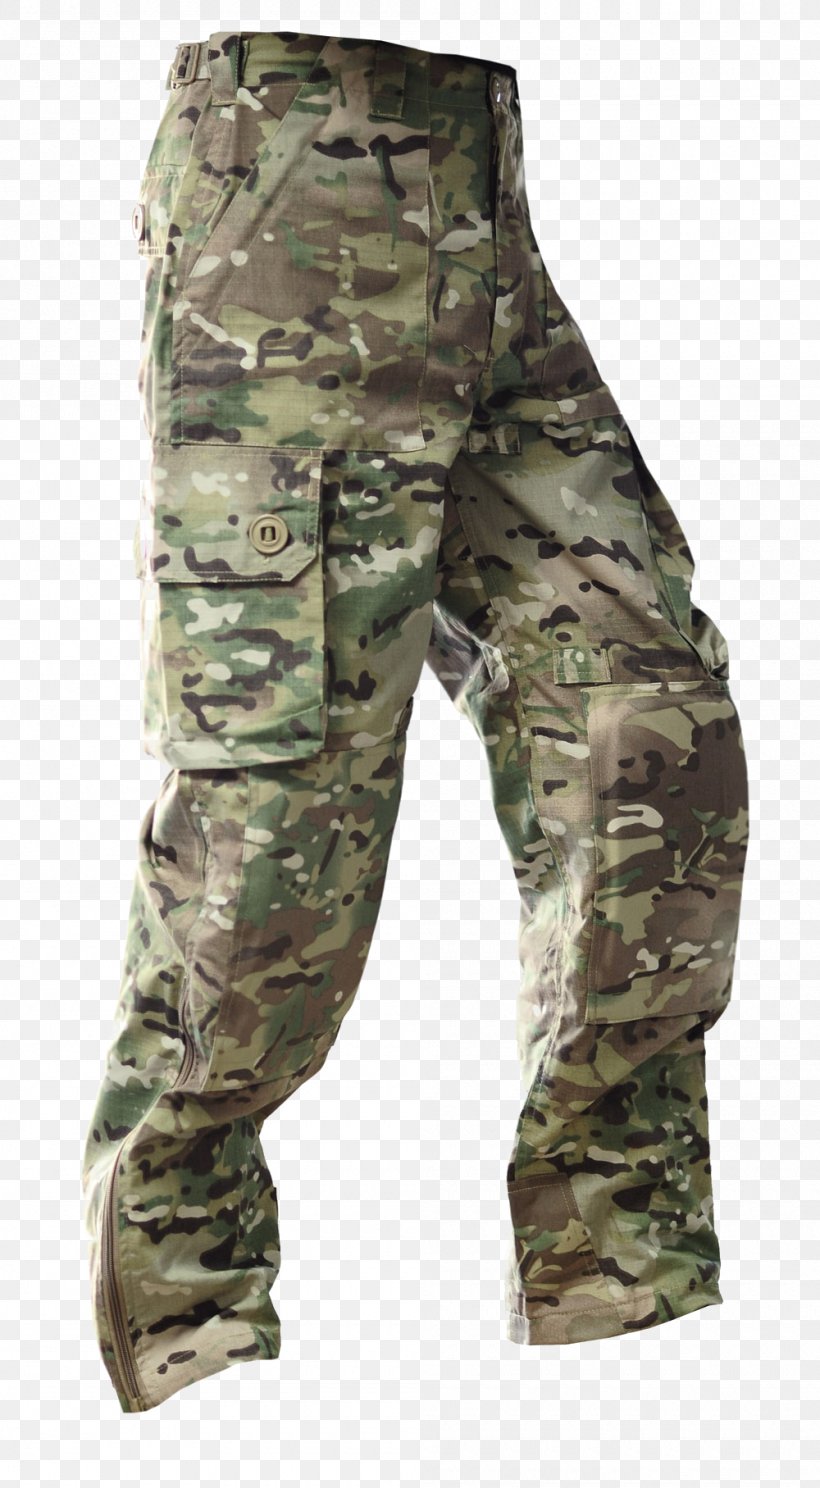 MultiCam Clothing Jacket Camouflage Pants, PNG, 1000x1815px, Multicam, Camouflage, Cargo Pants, Clothing, Clothing Accessories Download Free